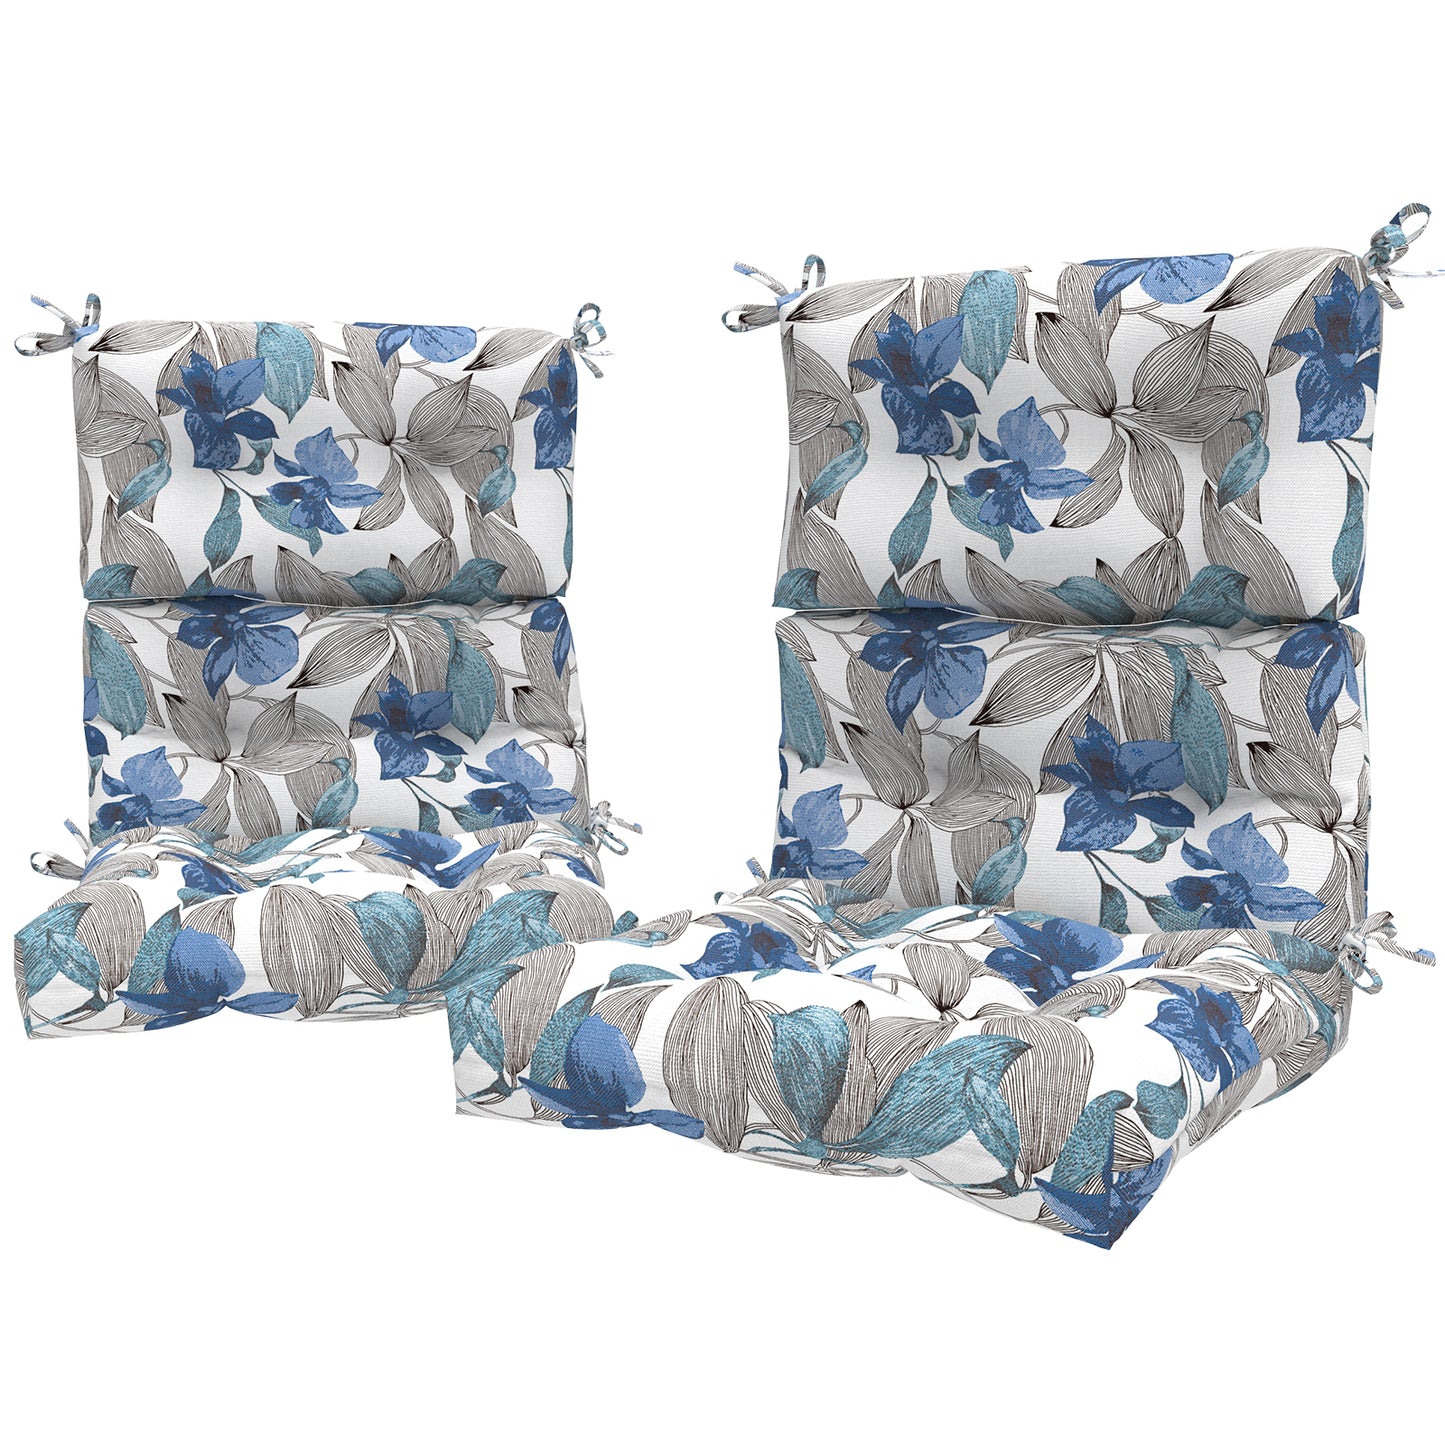 Melody Elephant Outdoor Tufted High Back Chair Cushions, Water Resistant Rocking Seat Chair Cushions 2 Pack, Adirondack Cushions for Patio Home Garden, 22" W x 20" D, Clemens Blue